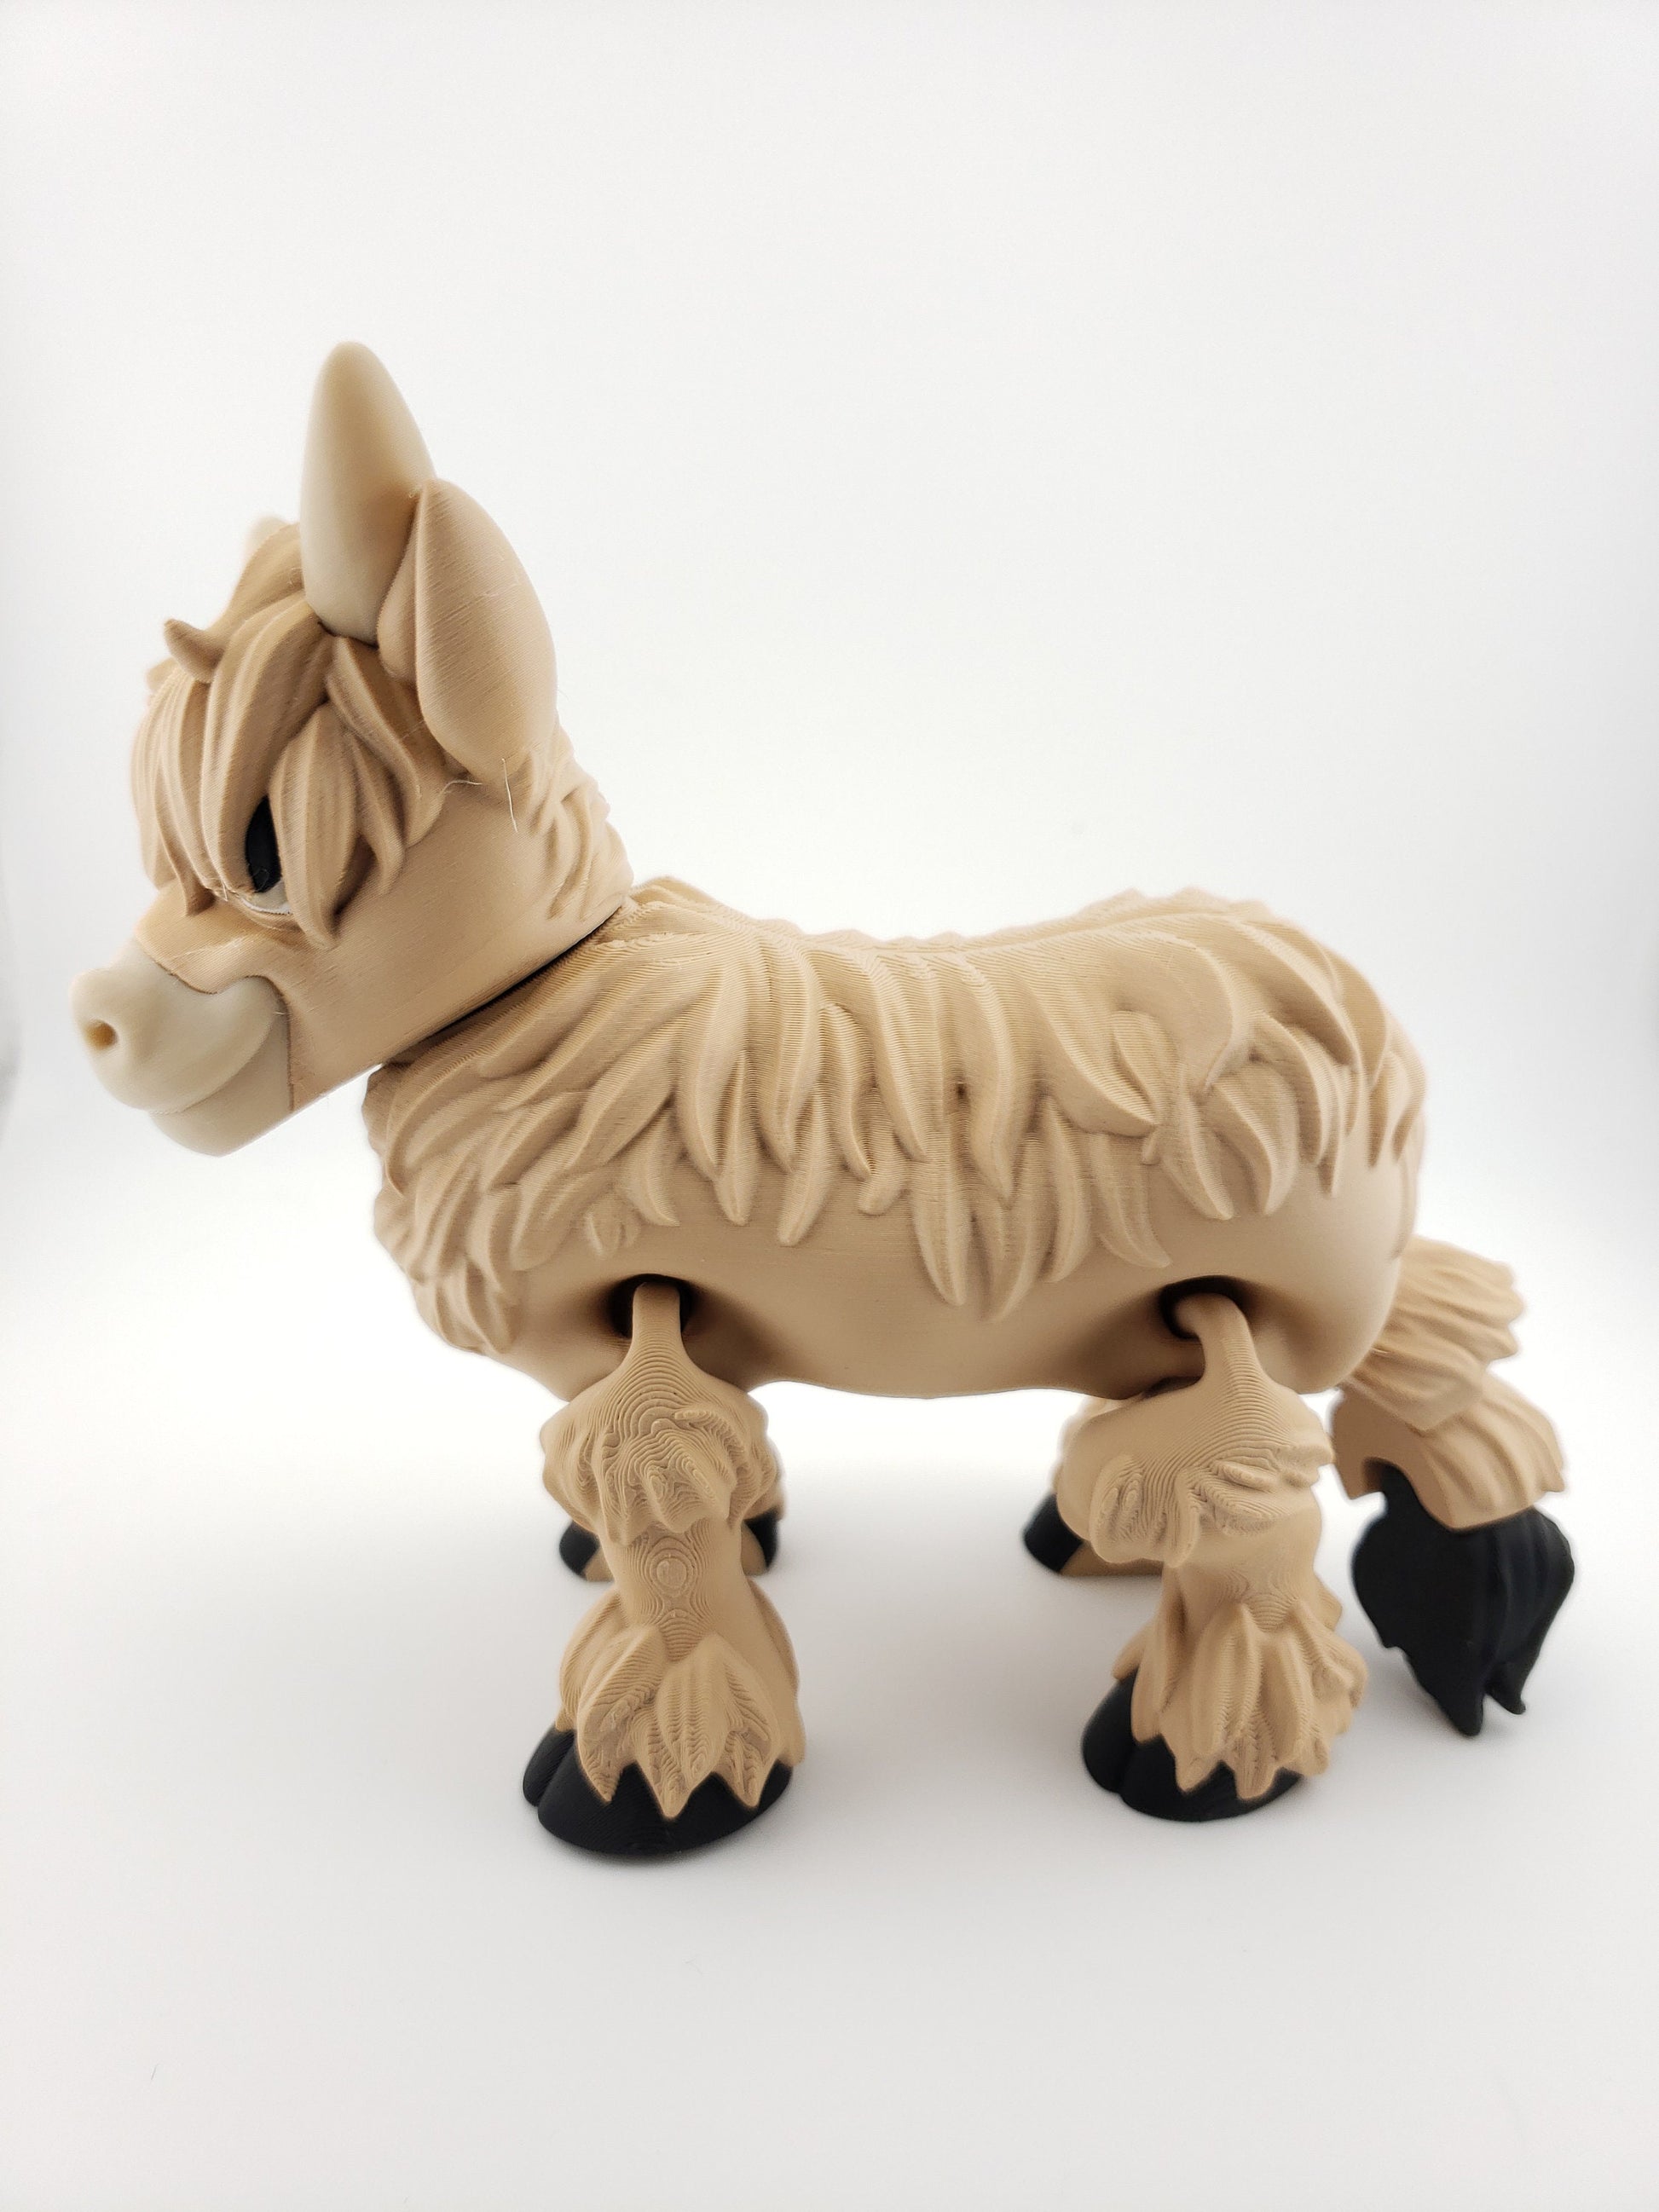 3D Printed Highland Cow Desk Toy - Multicolor Fancy Cow Figurine, Printverse Hairy Cattle, Fidget Office Decor, Articulated